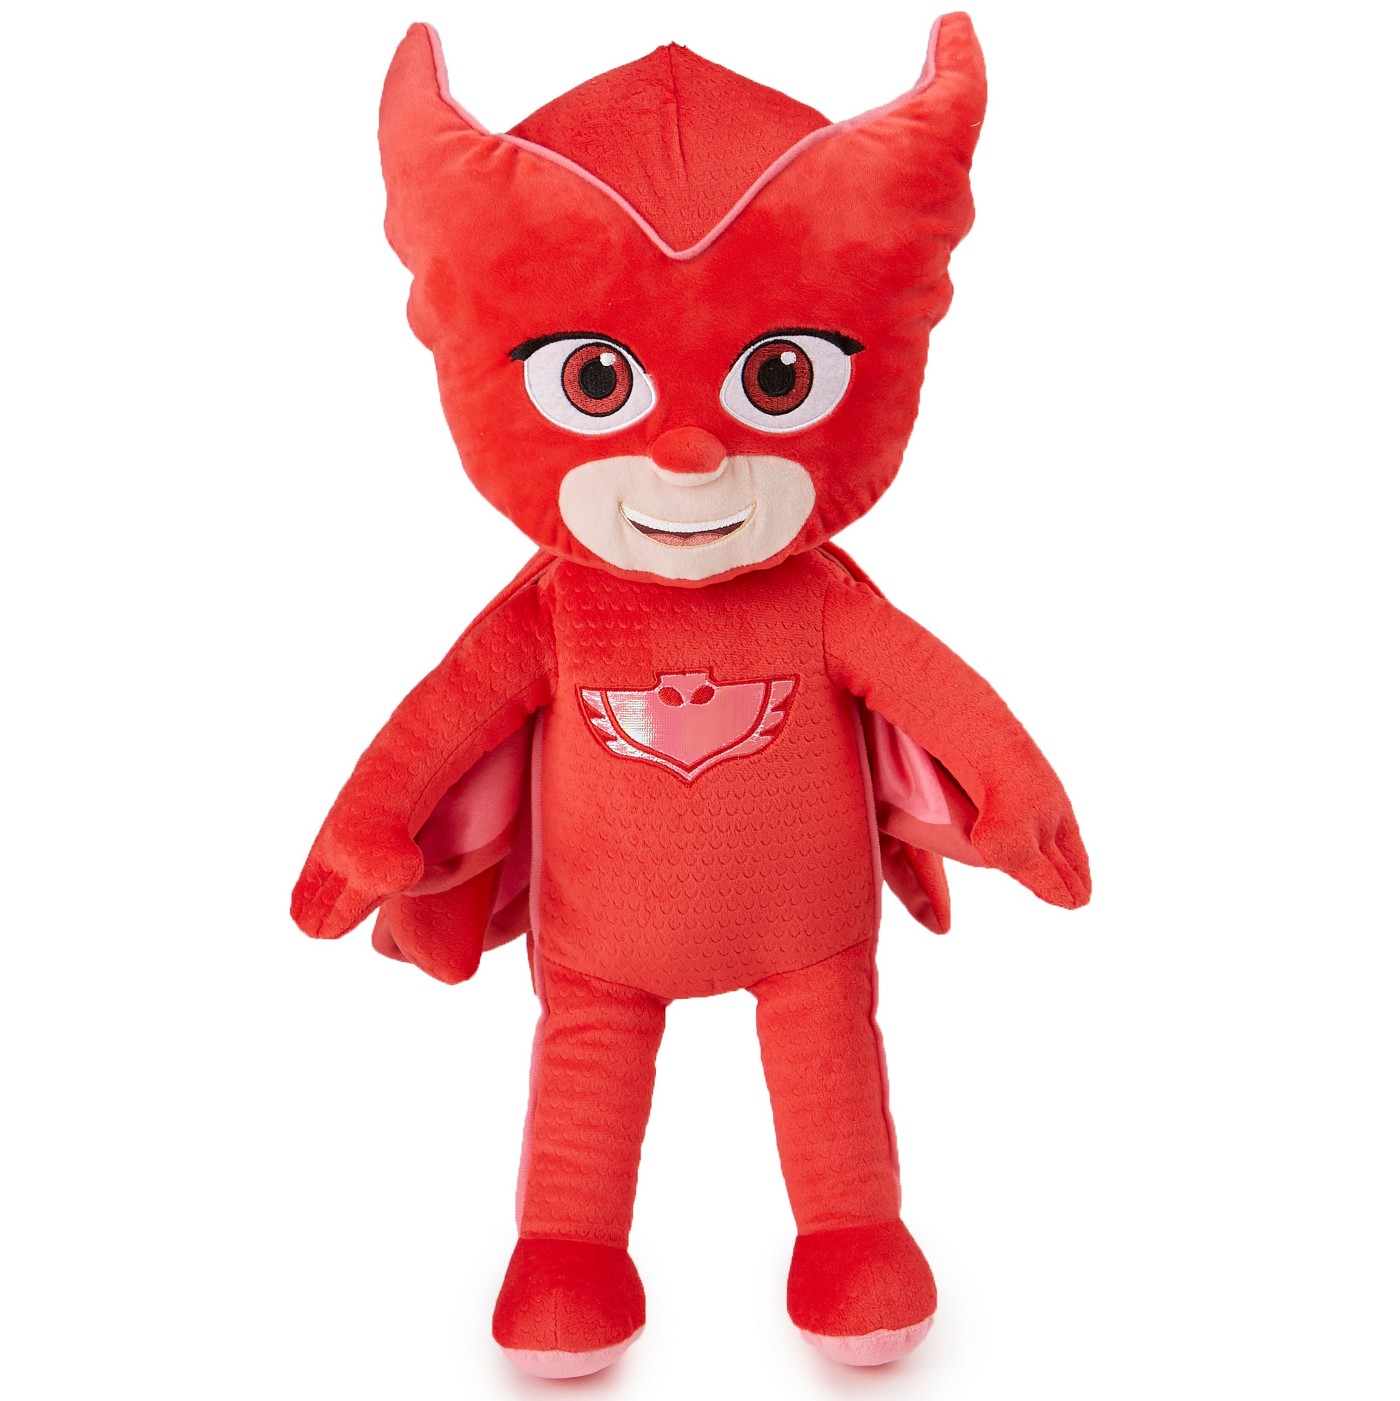 PJ Masks Owlette Pillow Buddy Red - image 1 of 3